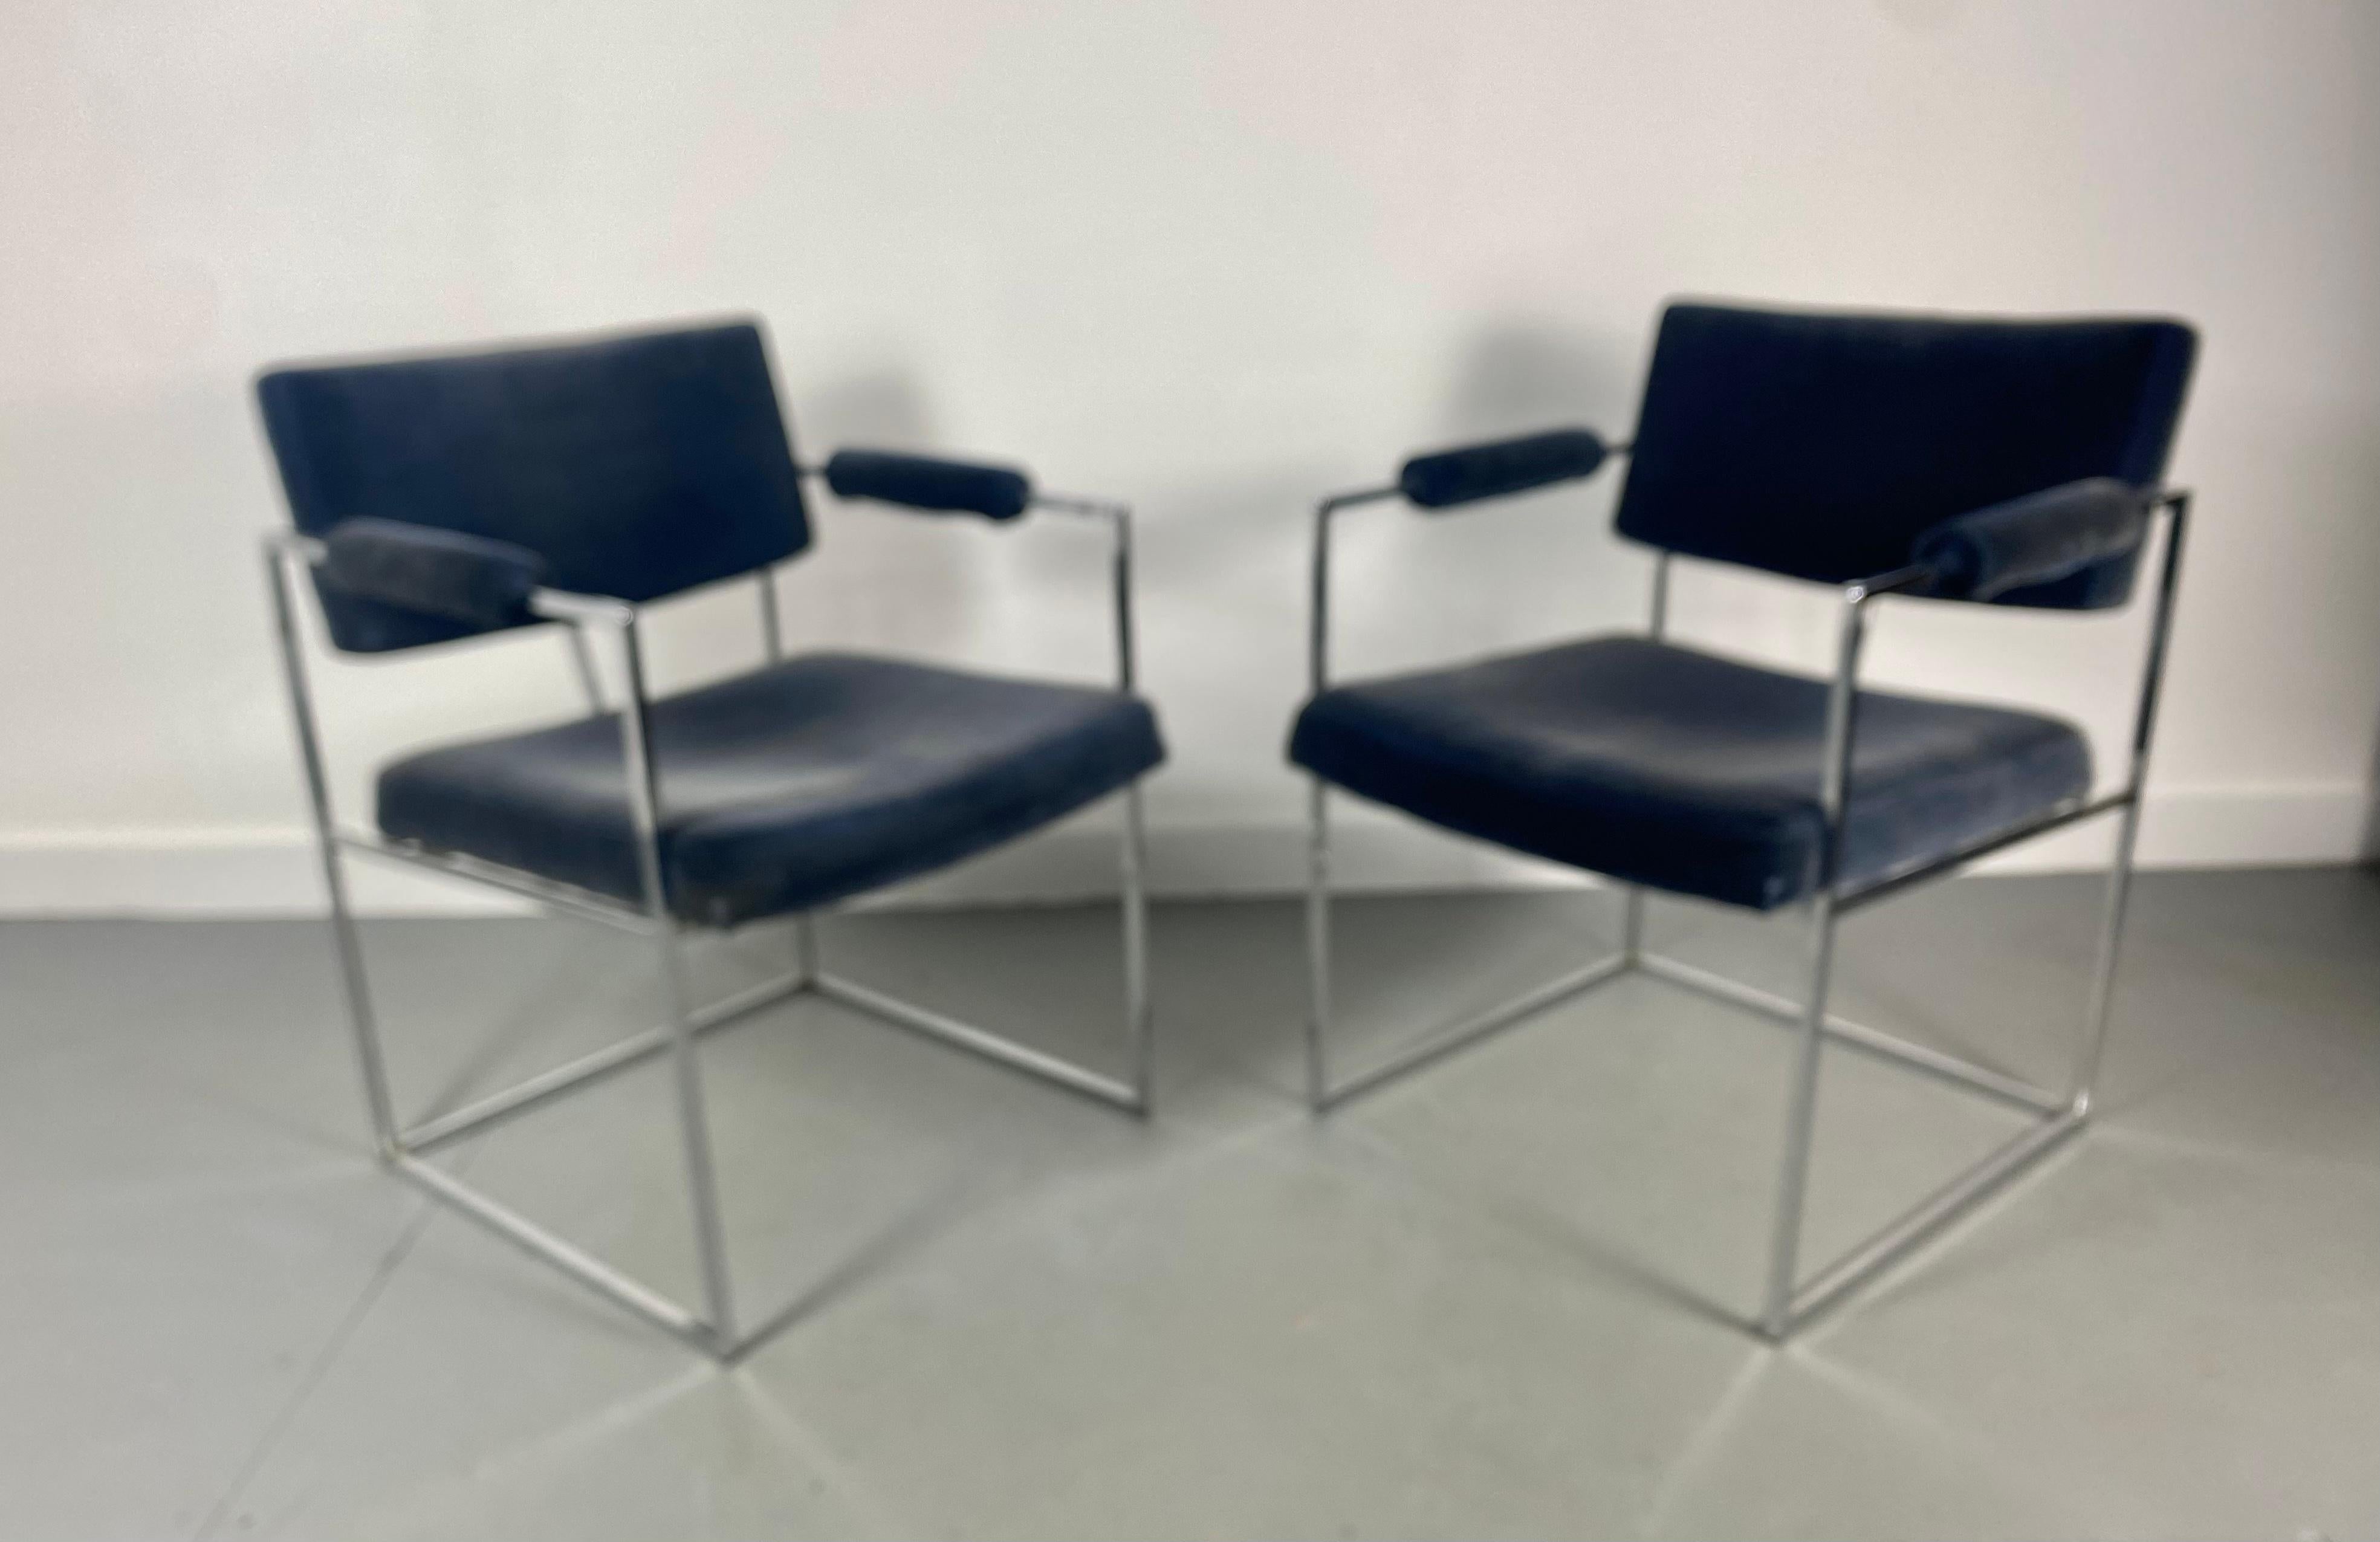 Outstanding pair Milo Baughman chrome dining/ lounge chairs, Mid-Century Modern, classic, elegant lines. Retains original blue/grey velvet upholstery. Extremely comfortable. Hand delivery avail to New York City or anywhere en route from Buffalo NY.